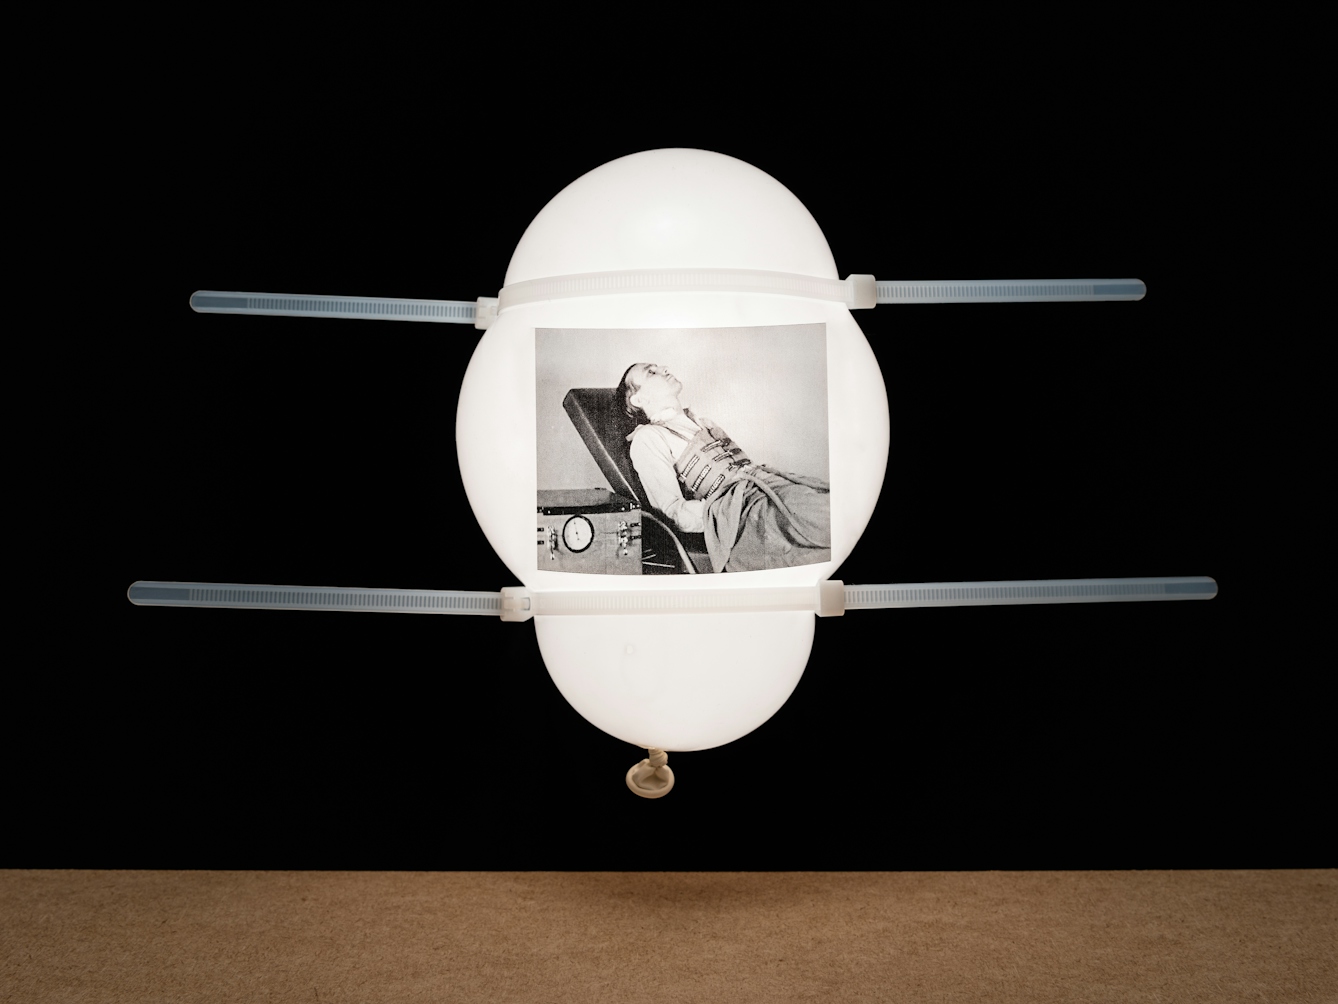 Photograph of a white inflated balloon against a black background, floating vertically above a wooden tabletop horizon line. The balloon looks like it is illuminated from within. On the side of the balloon is a rectangular, monochrome archive film still. The still shows a man lying propped upright on a bed with a contraption made of straps wrapped around his chest. To his right is a mechanical box which is connected to the chest contraption.  The two work together as an artificial ventilator. The balloon has 2 white cable ties around its surface which are deforming the balloon's shape and  echoing the contraption shown in the film still.